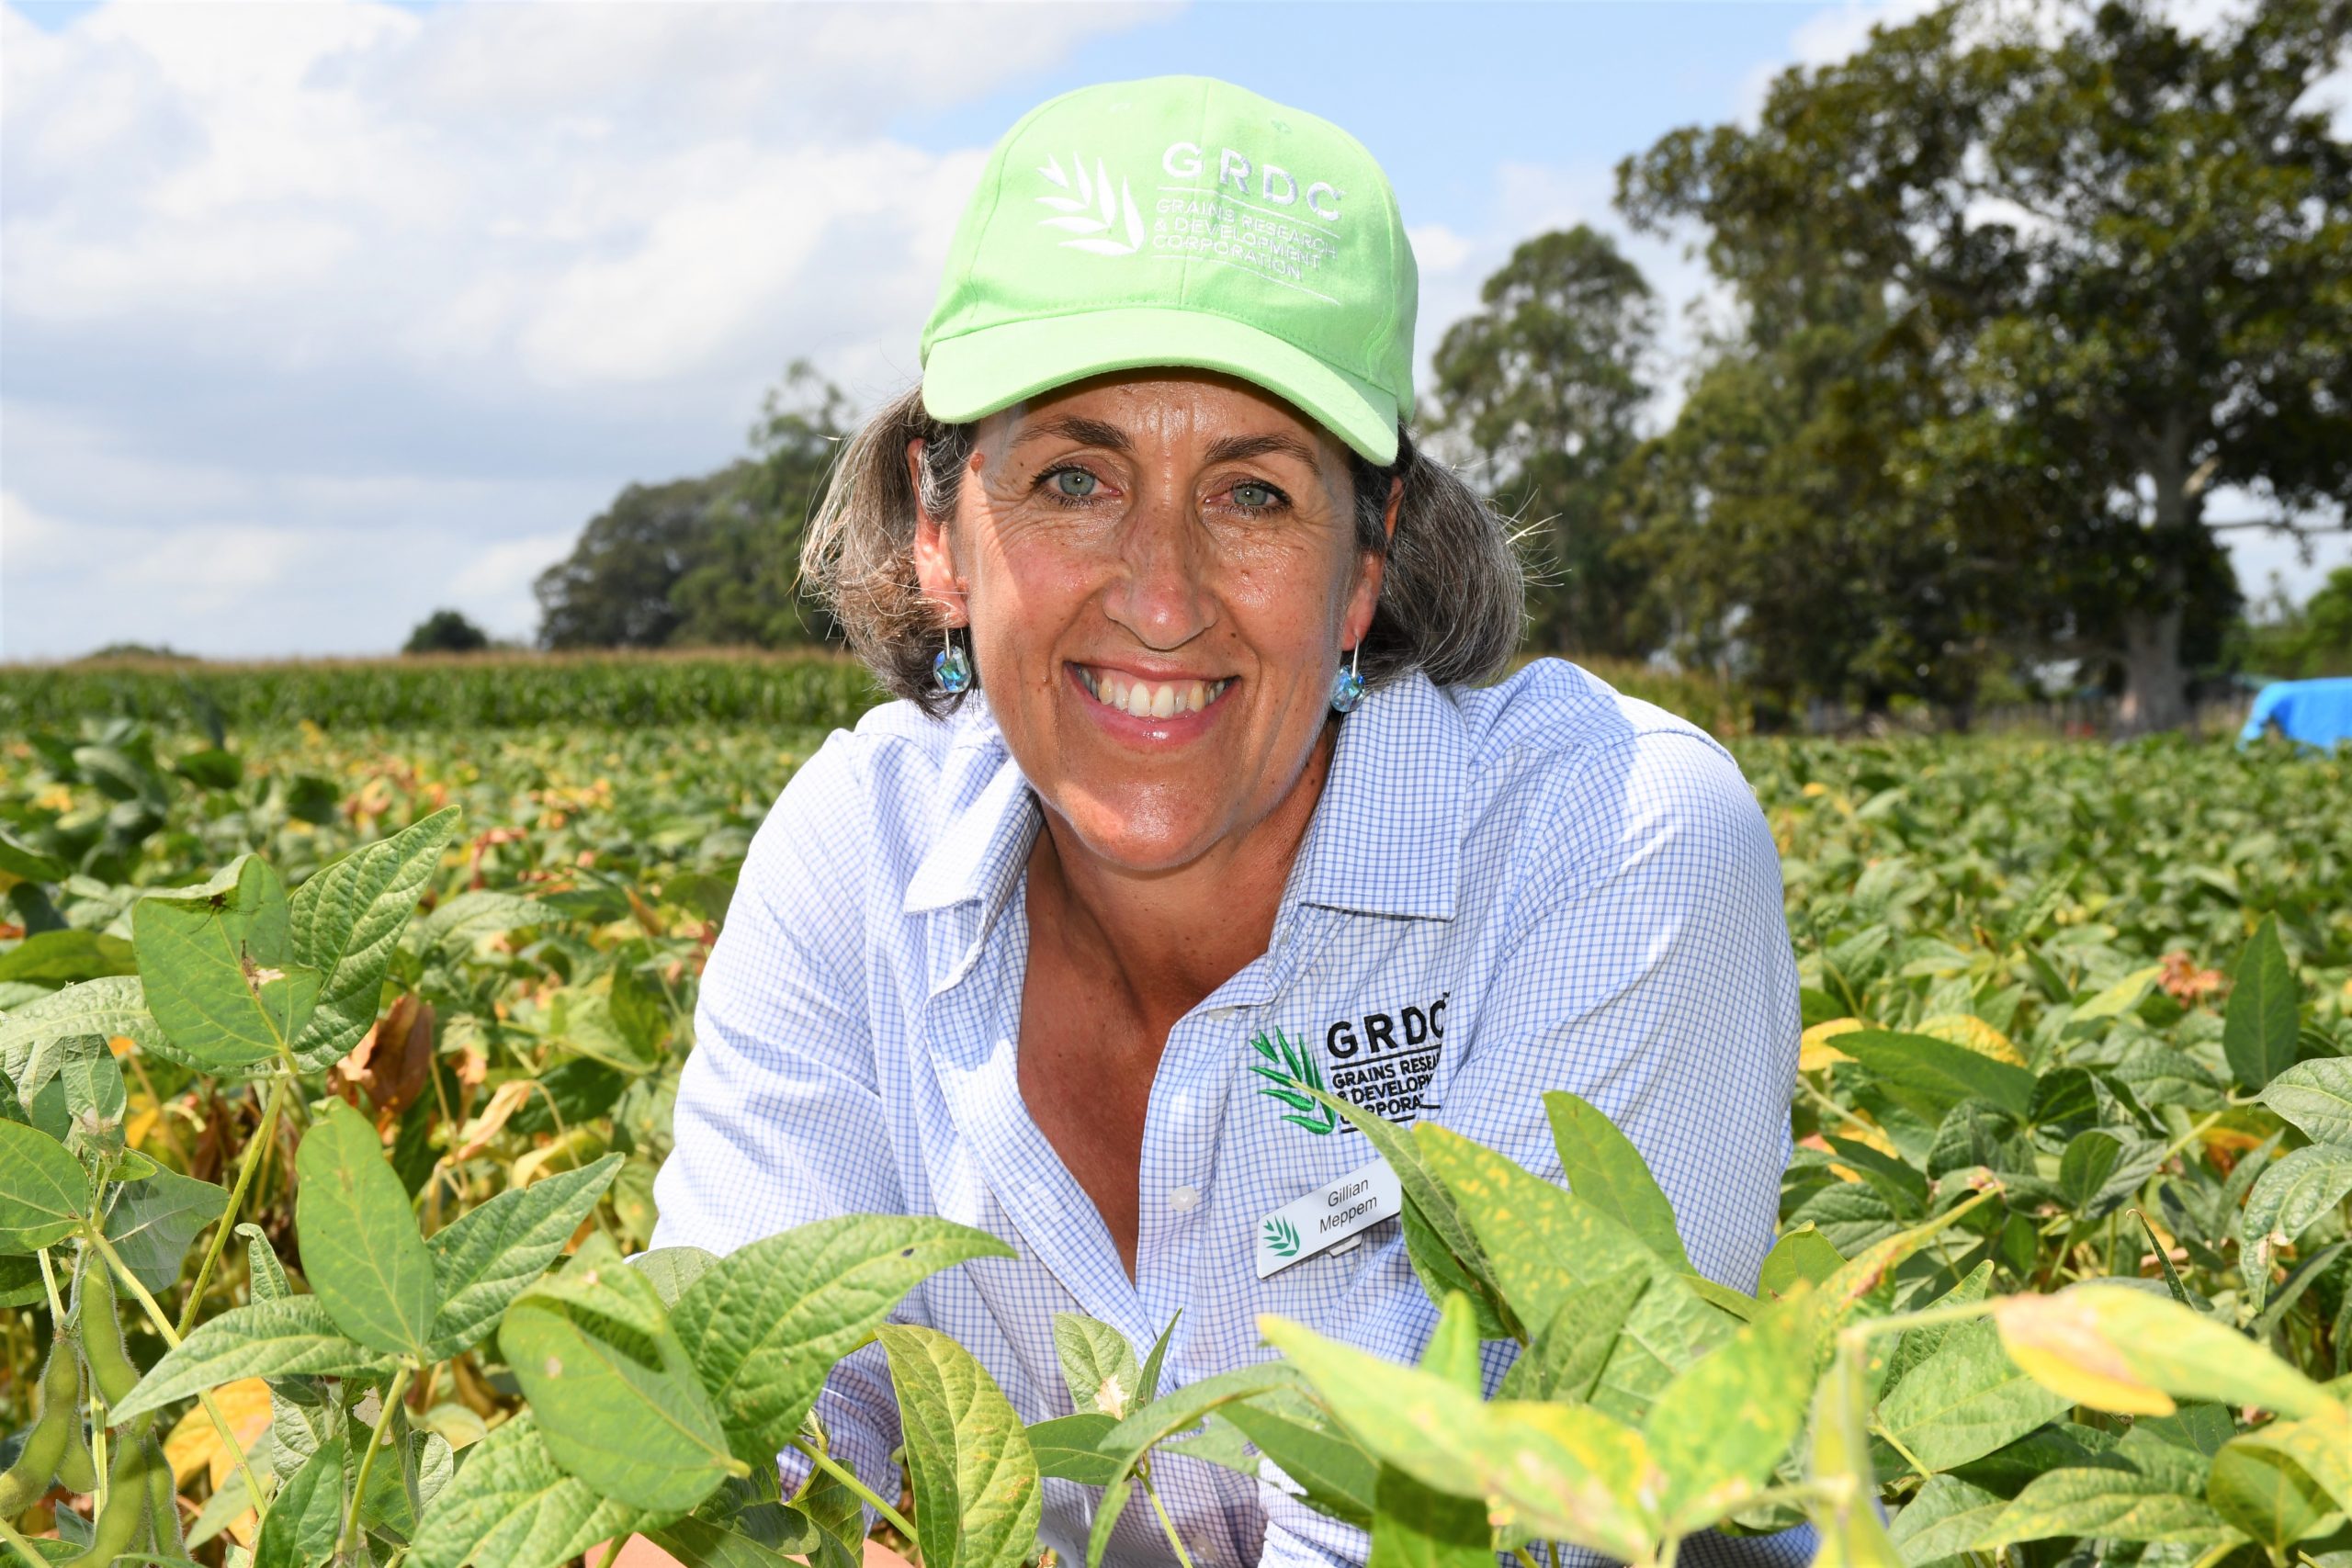 Good relationships the key to success, says GRDC’s Gillian Meppem